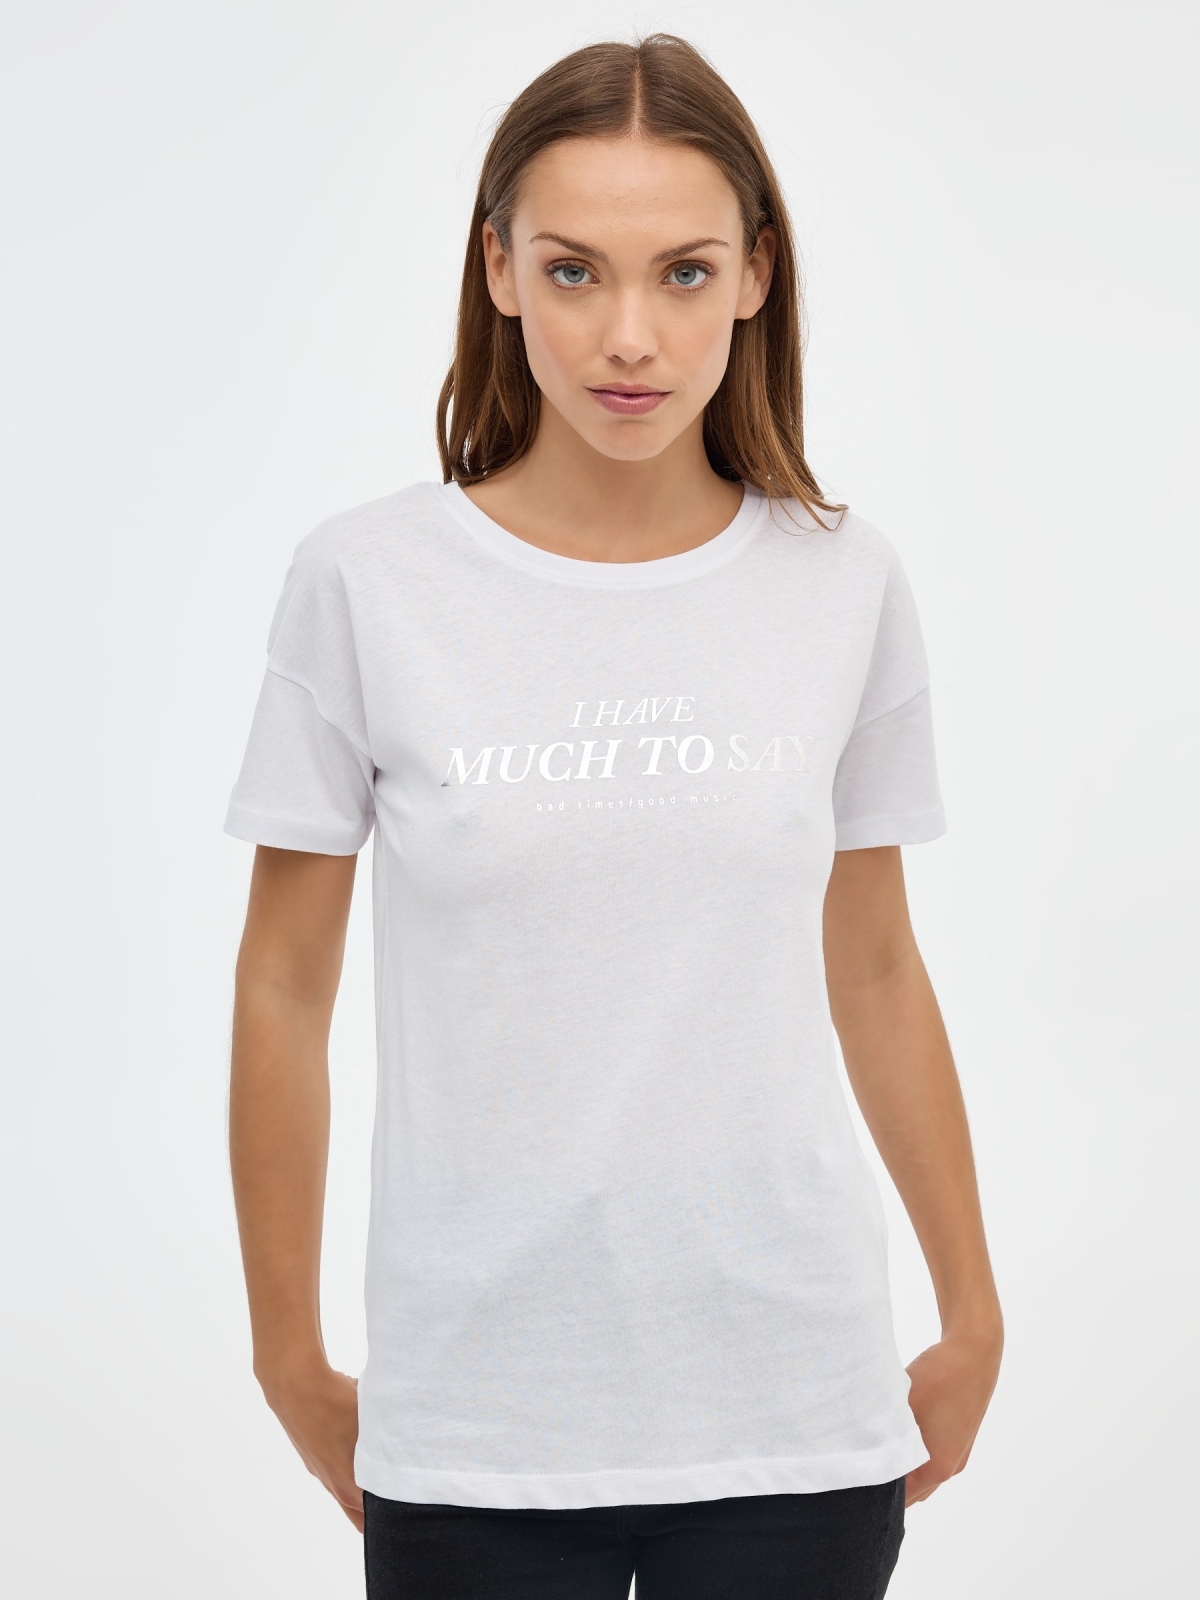 T-shirt Much to Say branco vista meia frontal